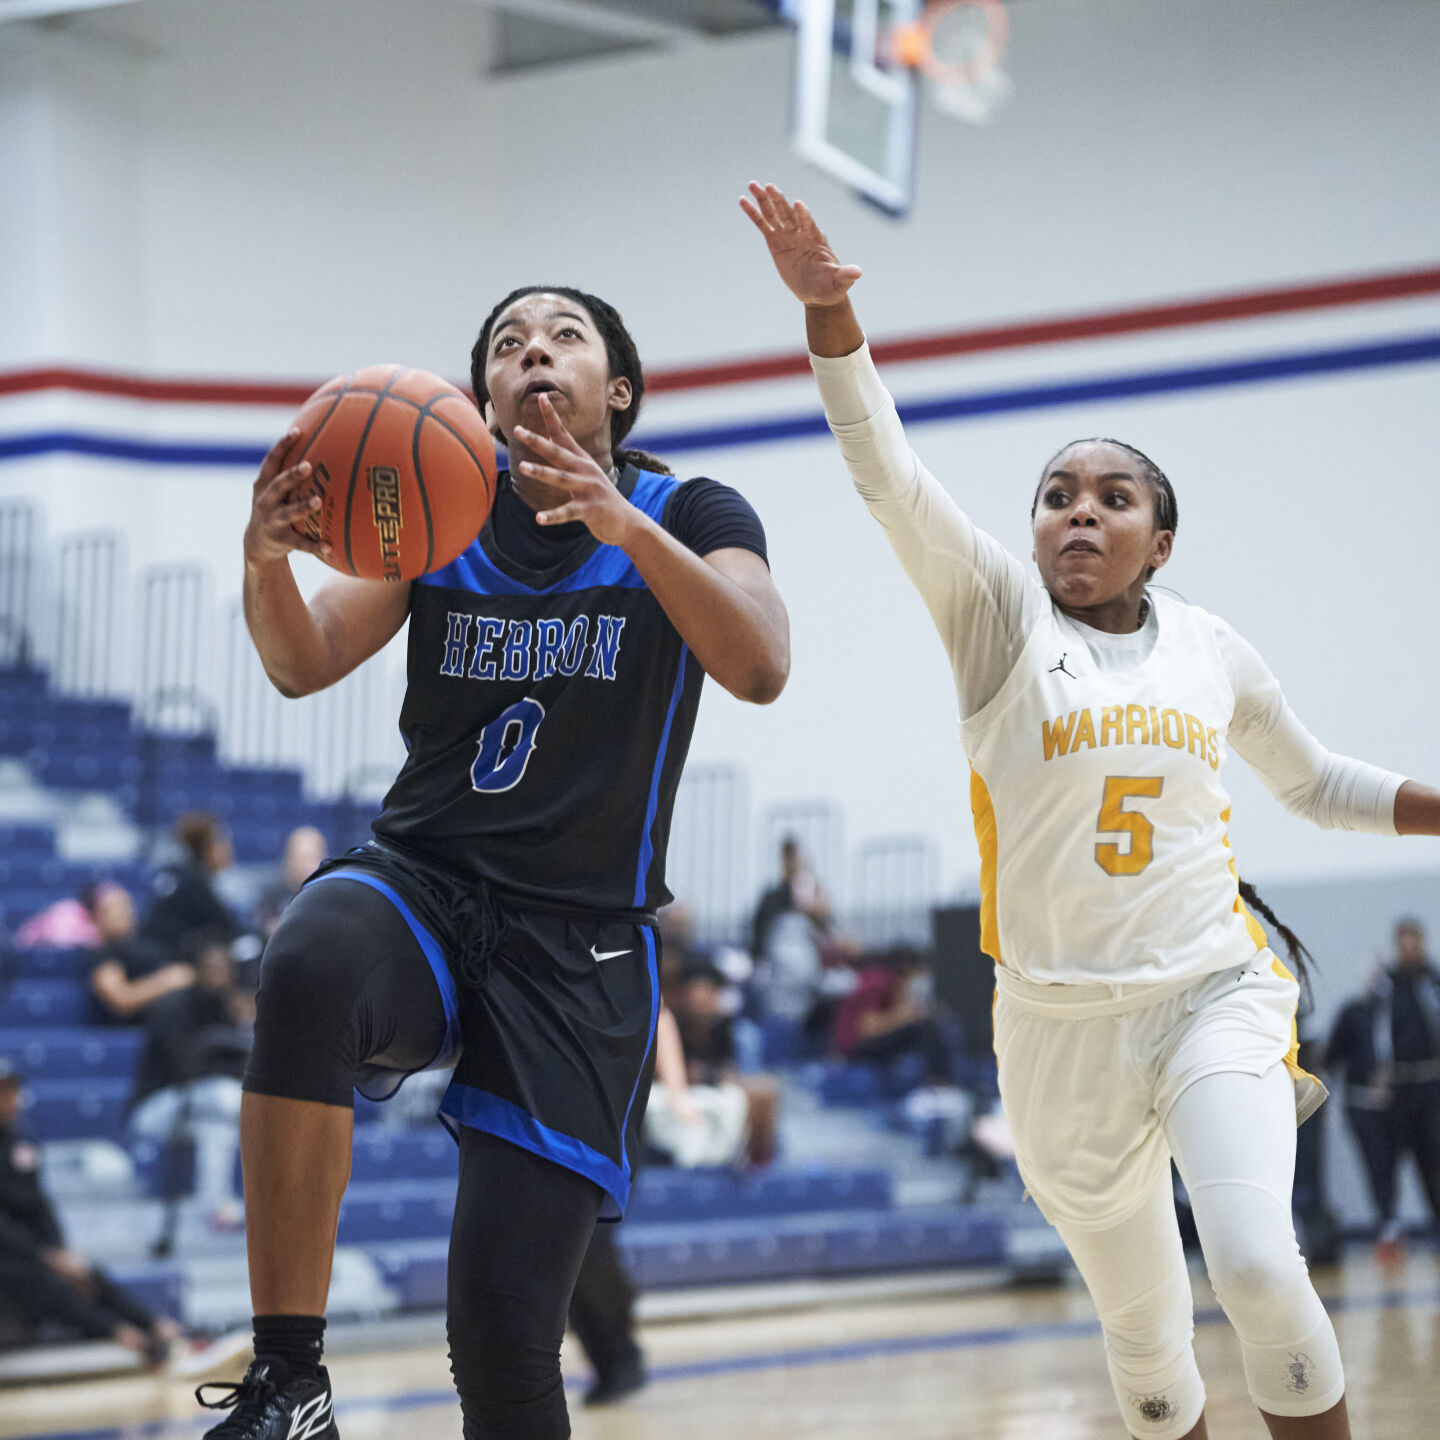 Texas Association of Basketball Coaches Releases Comprehensive State Rankings for Boys and Girls Teams